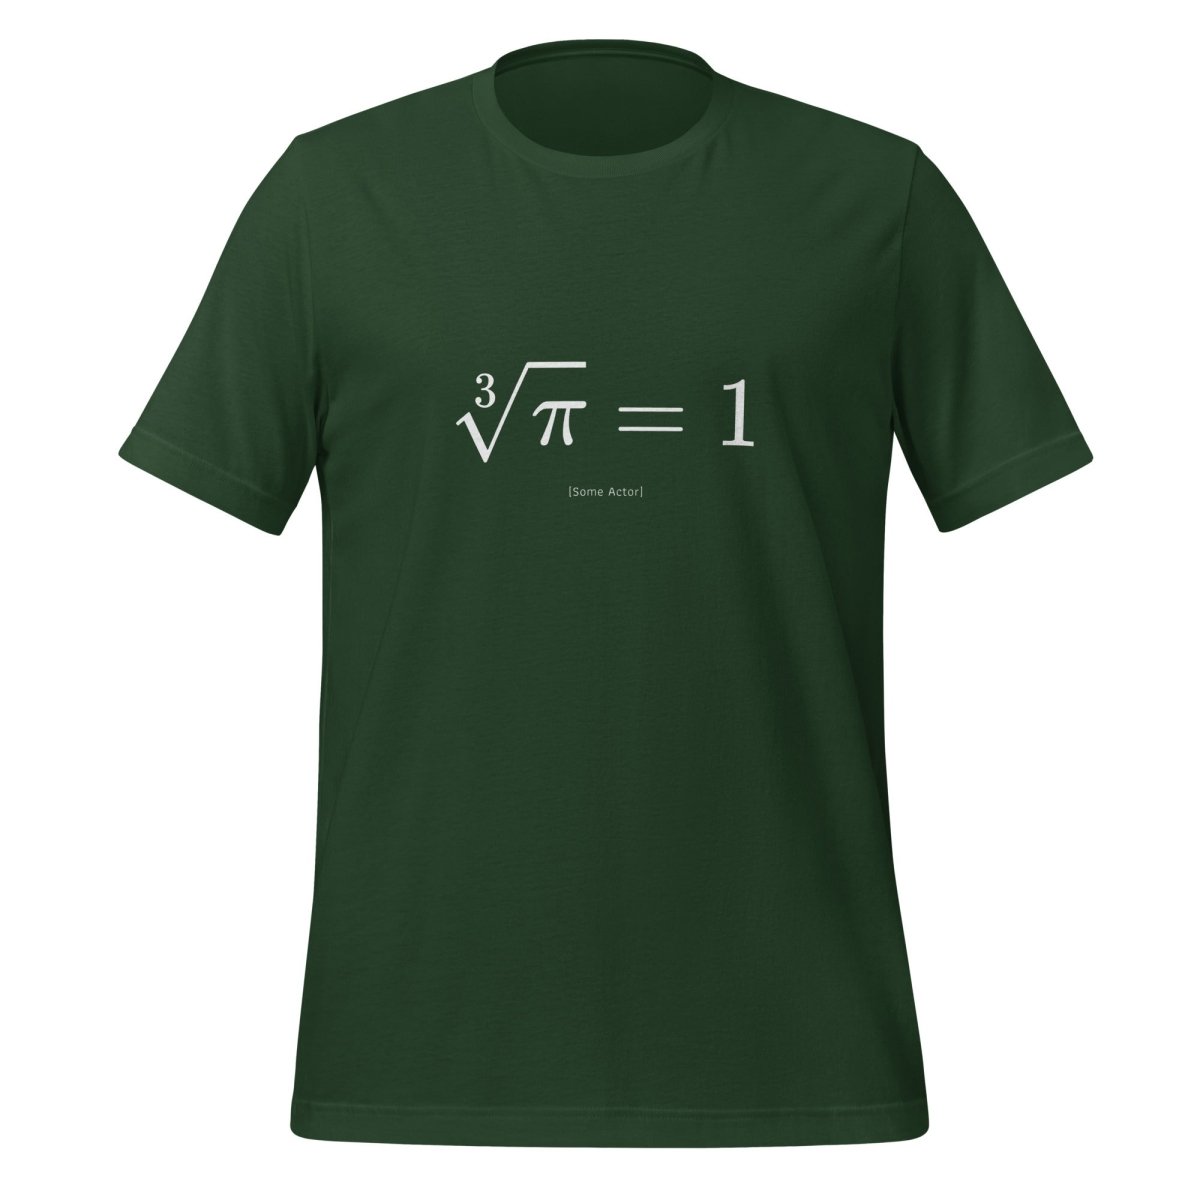 The Cube Root of Pi Equals 1 T - Shirt (unisex) - Forest - AI Store